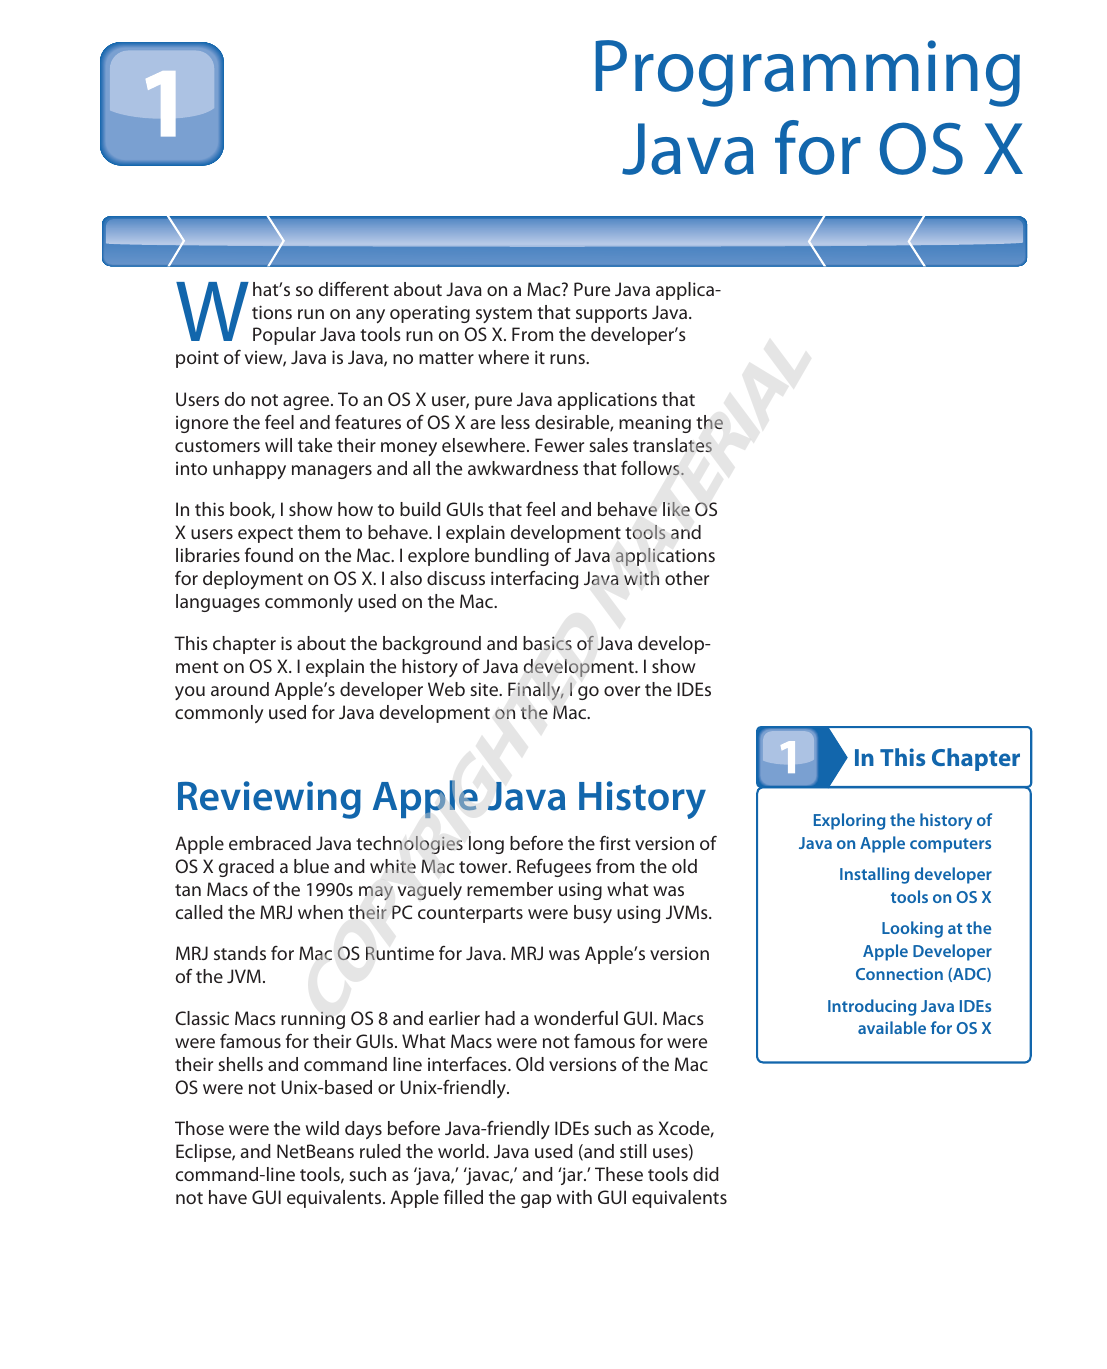 pc or mac for java